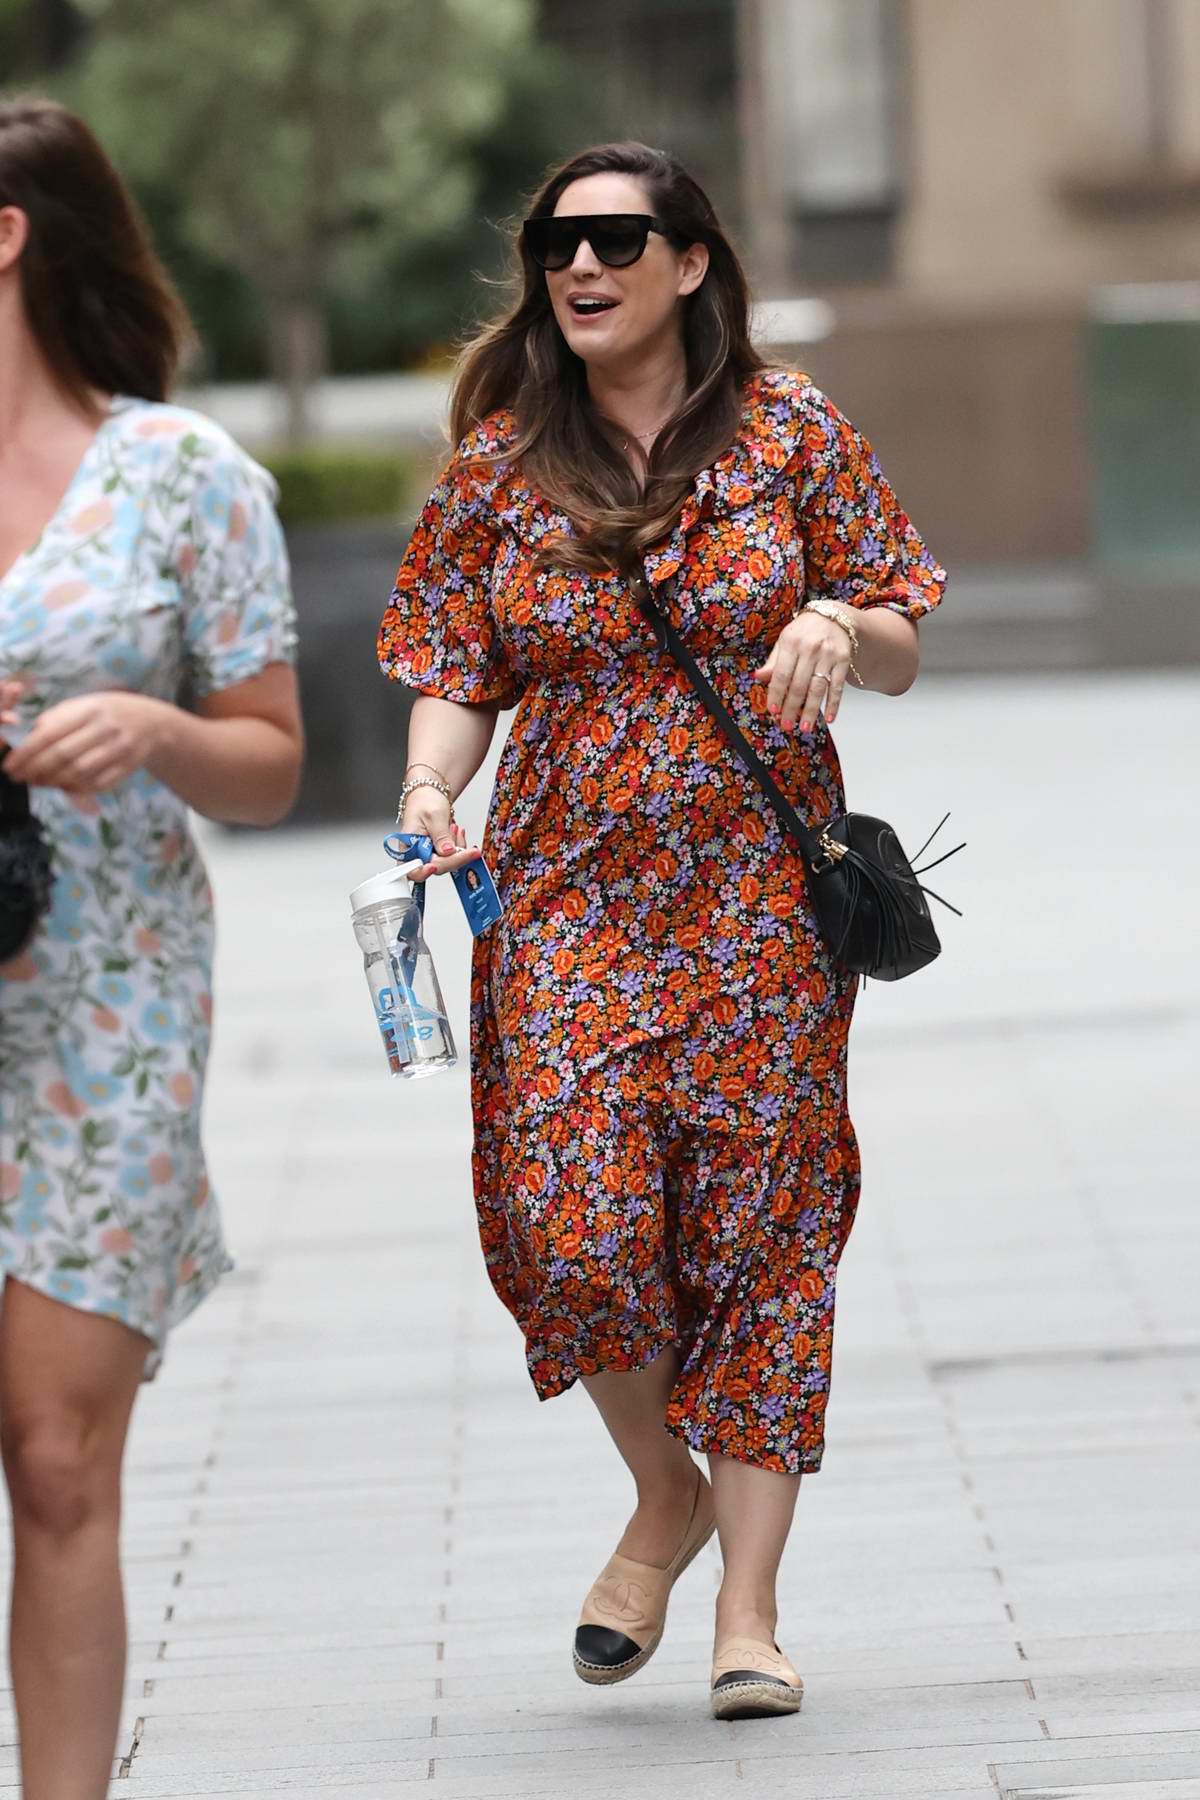 Kelly Brook is all smiles as she leaves Heart Radio in a colorful ...